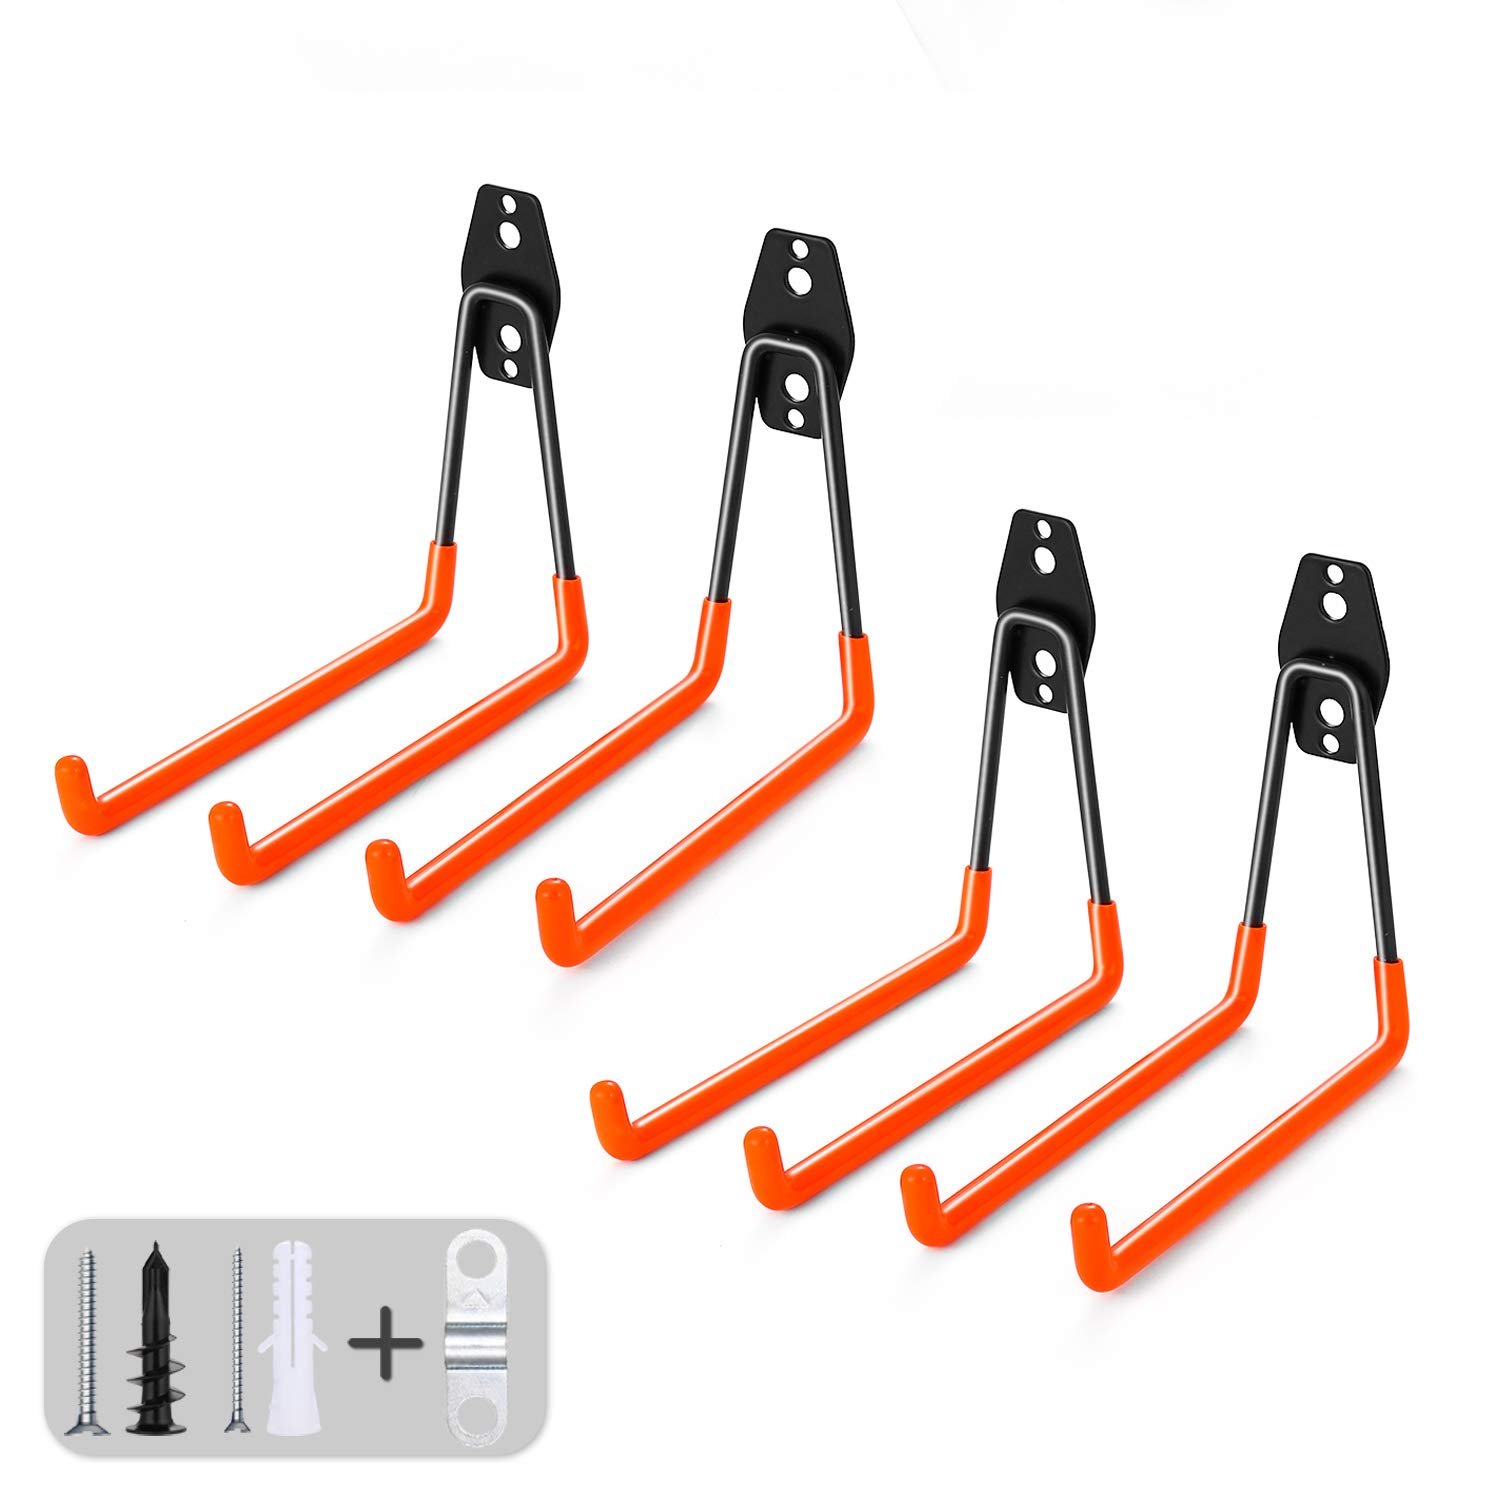 Book Cover ONEPENG 4pcs Car Storage Utility Hooks Wall Mounted and Heavy Duty Garage Hooks and Organizer for Home Garage Storage Storage Garden Tools